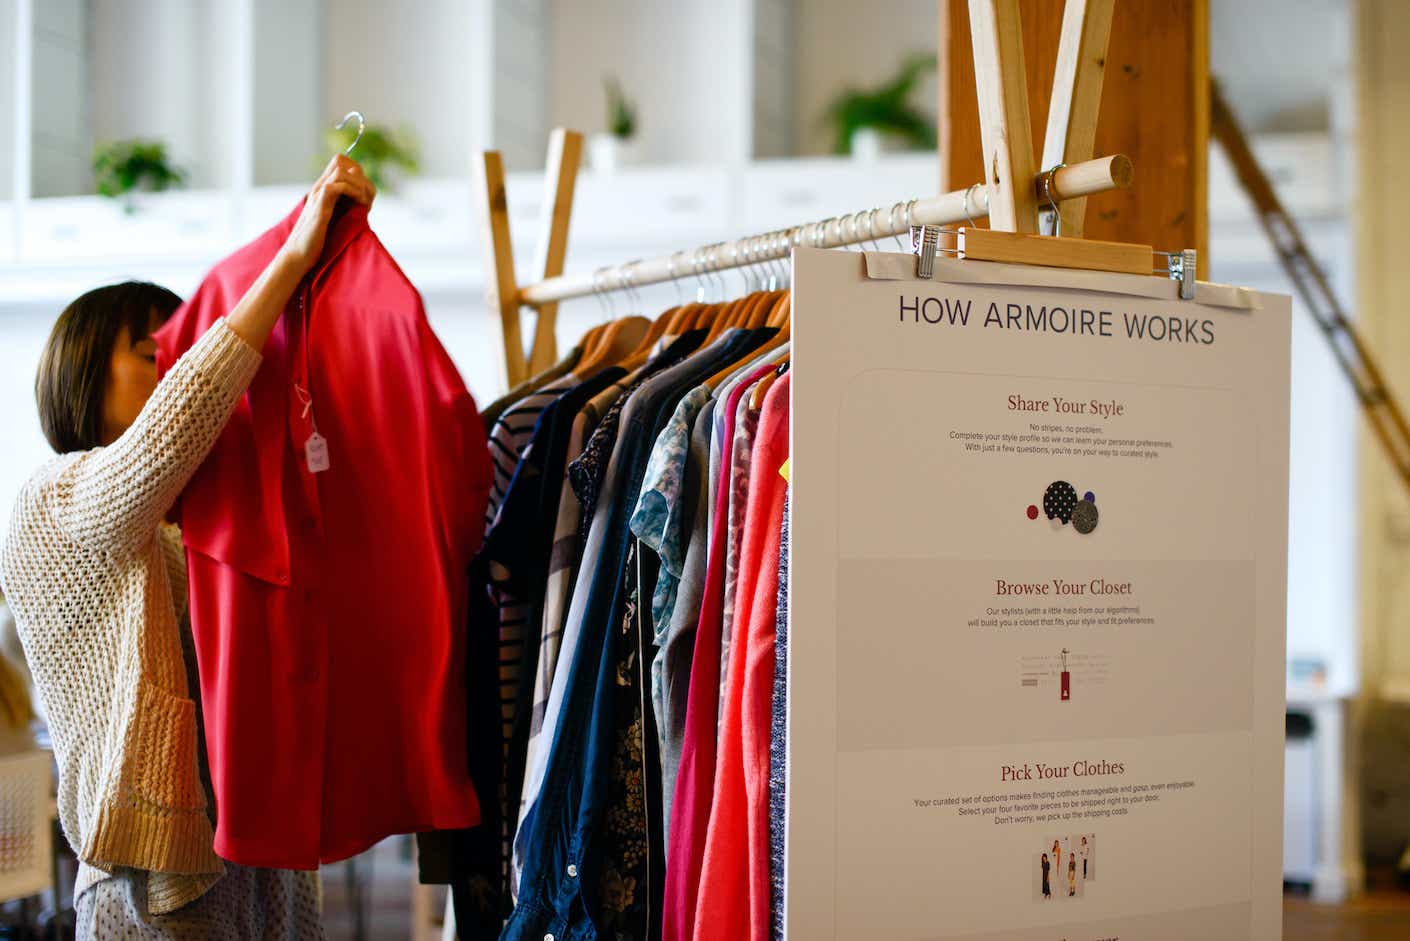 A rack of colorful clothing has an Amroire label attached.